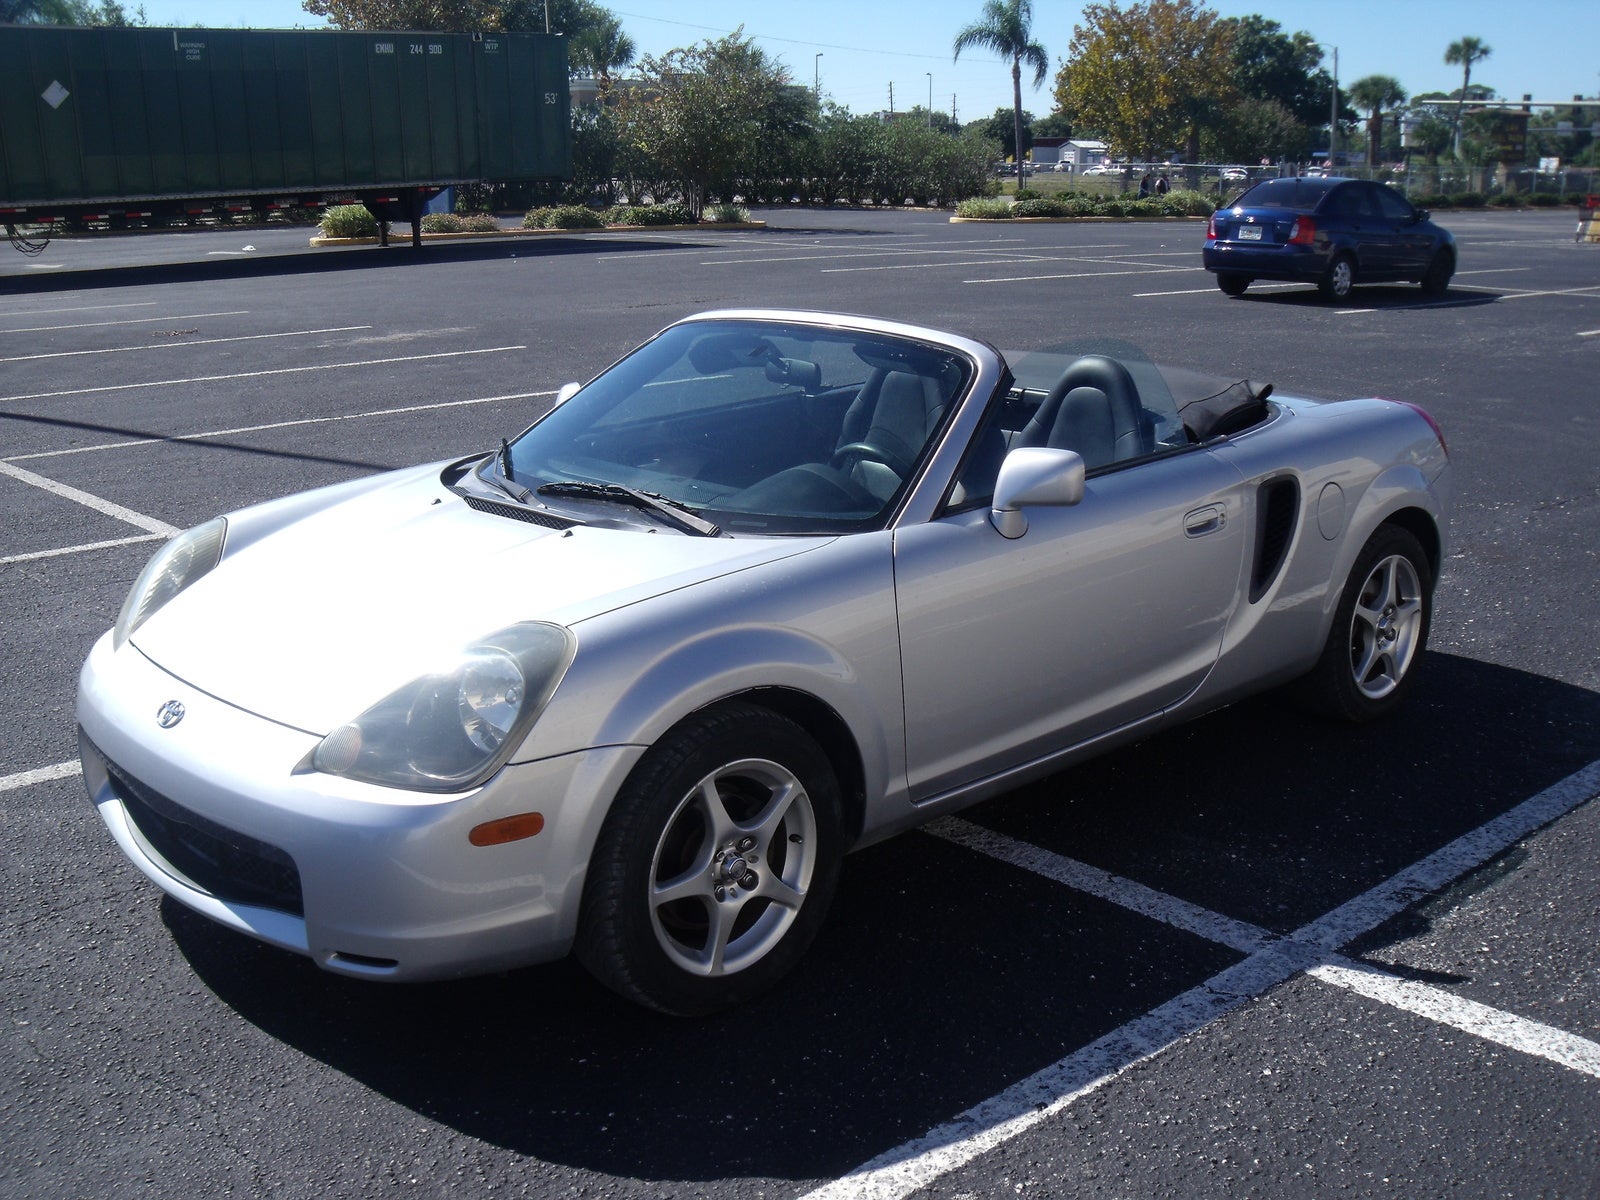 Service manual [Hayes Car Manuals 2002 Toyota Mr2 Engine ...